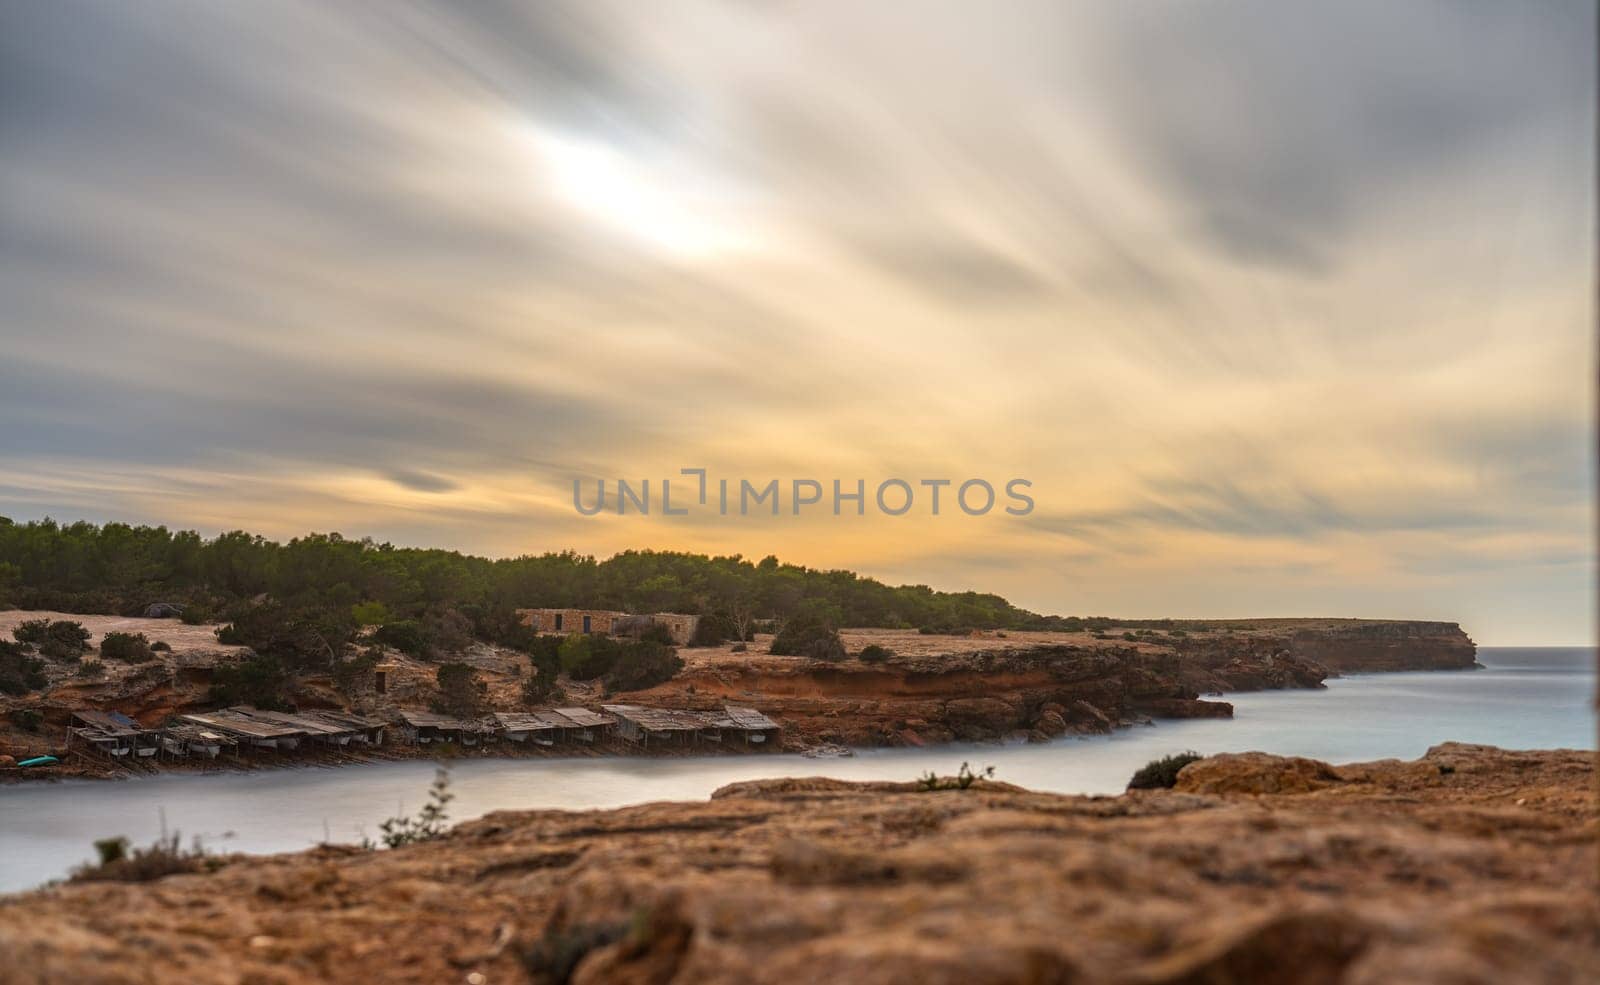 Long exposure photo captures rocky cove in Formentera with fishermen's boats, smooth sea, and fluffy clouds at sunset.